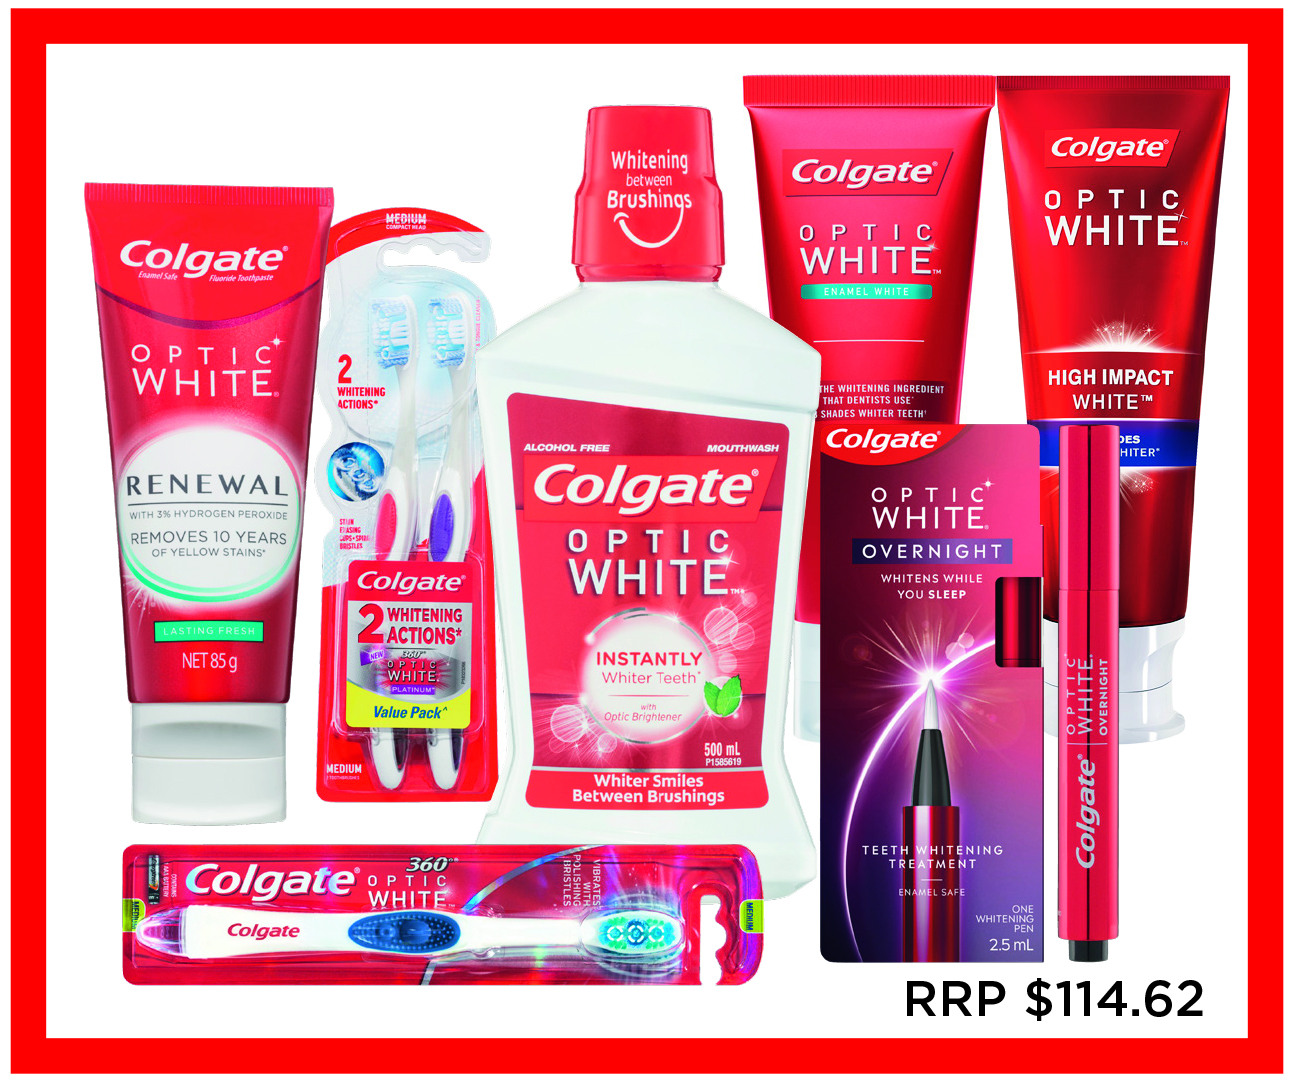 Win the Ultimate Teeth Whitening Prize Pack thanks to Colgate Optic White